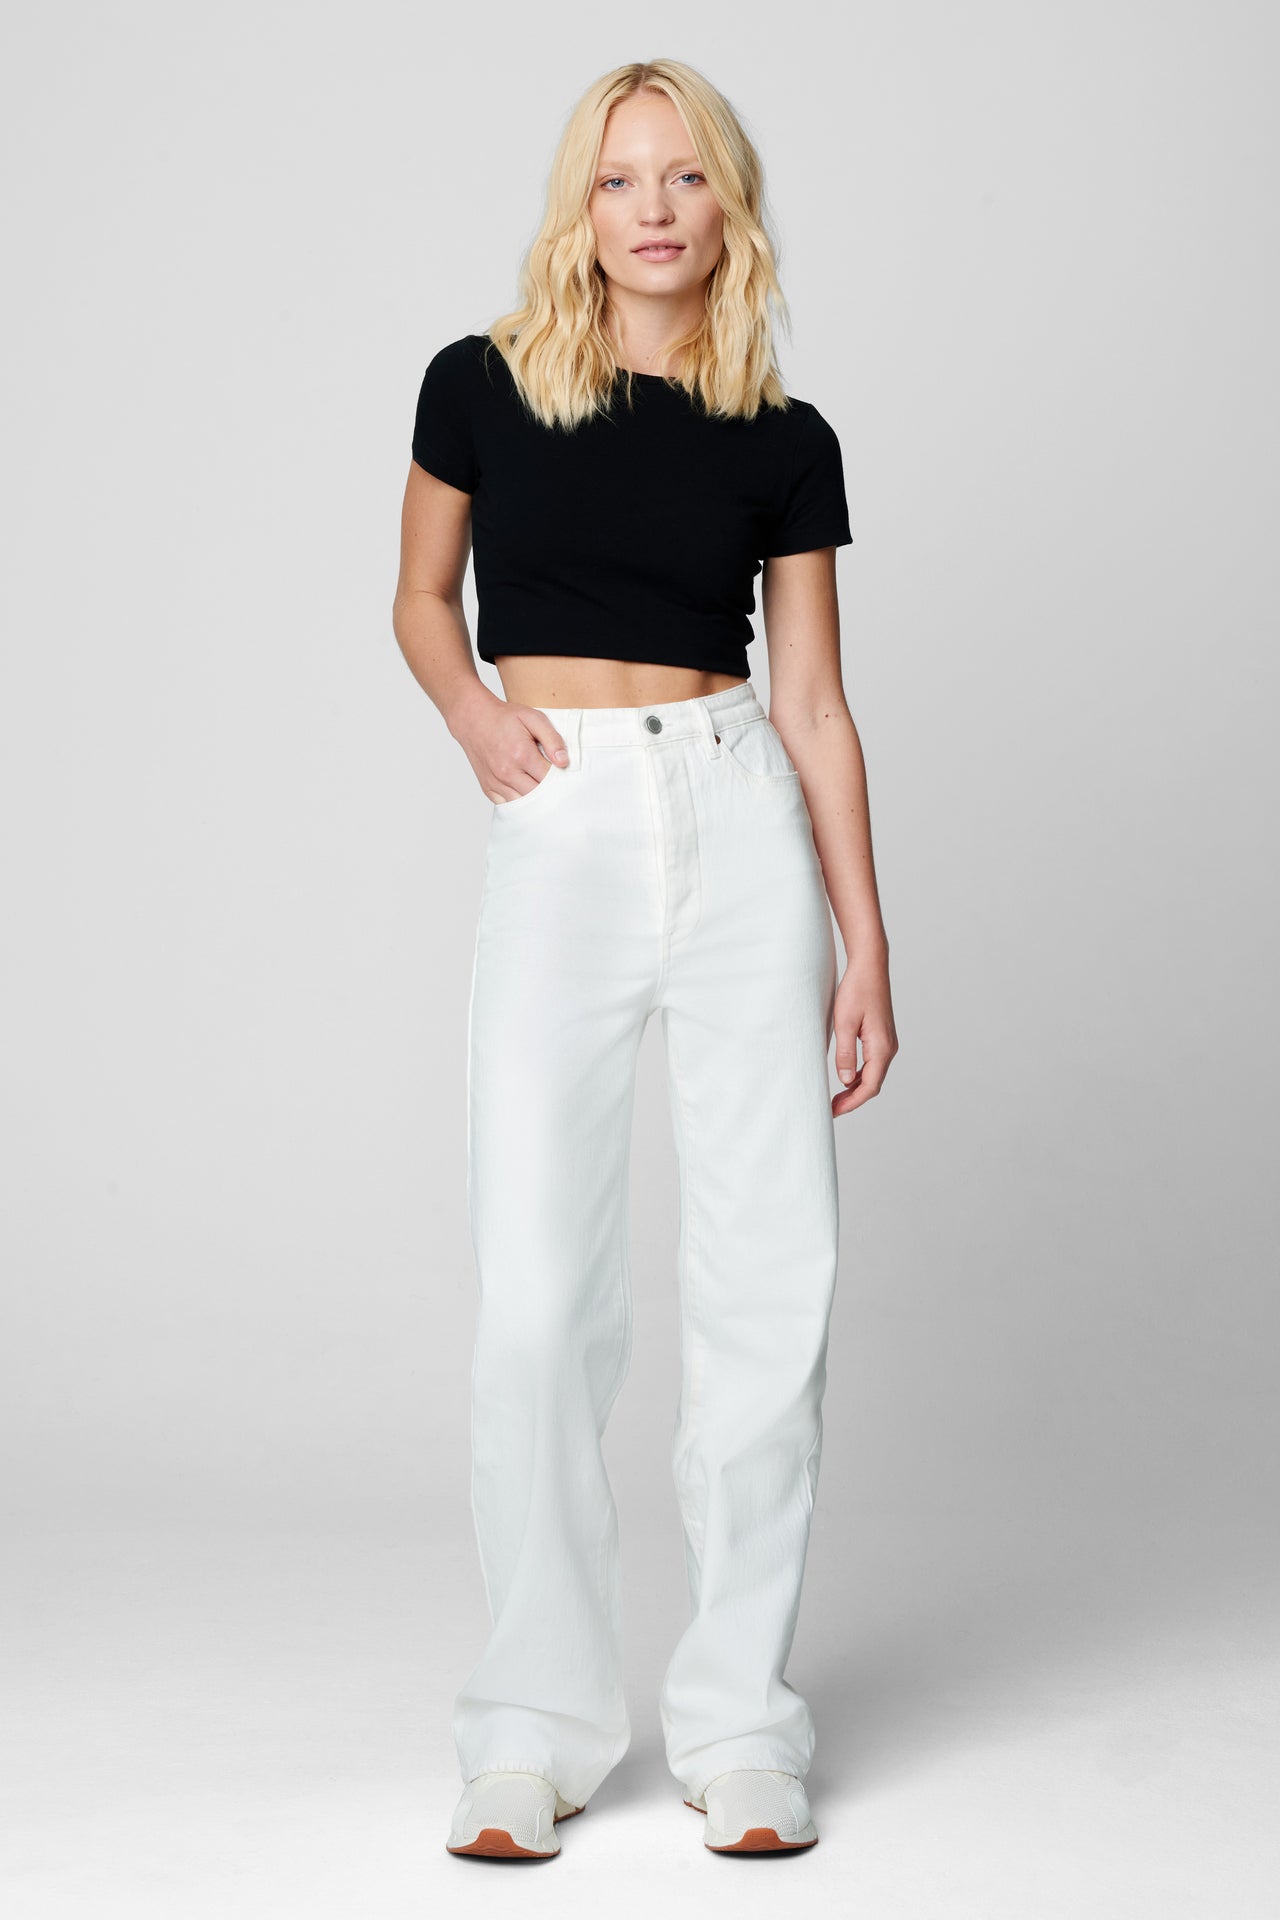 See You Again Straight Leg White, Bootcut Denim by Blank NYC | LIT Boutique